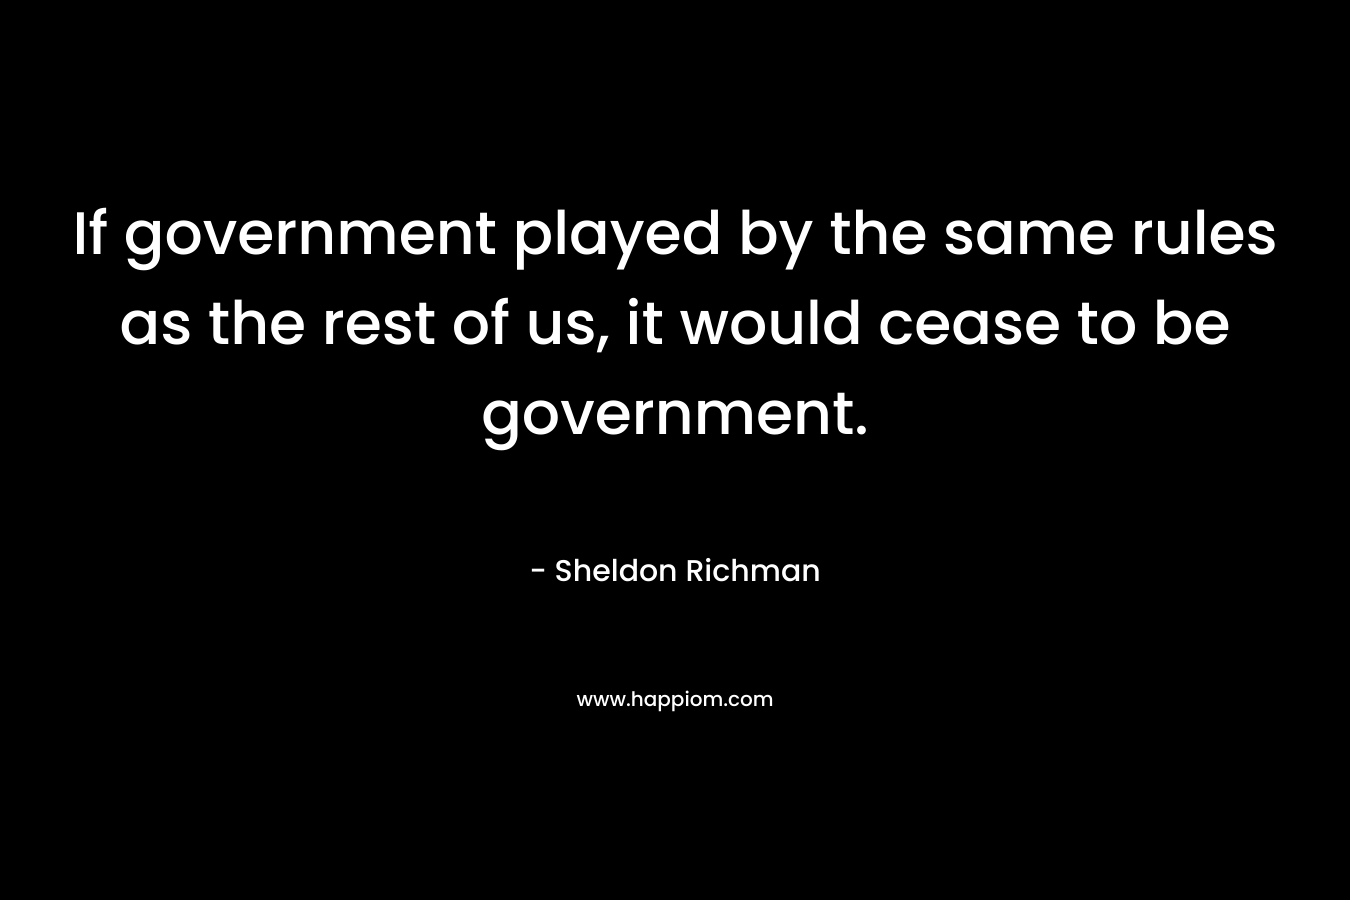 If government played by the same rules as the rest of us, it would cease to be government.